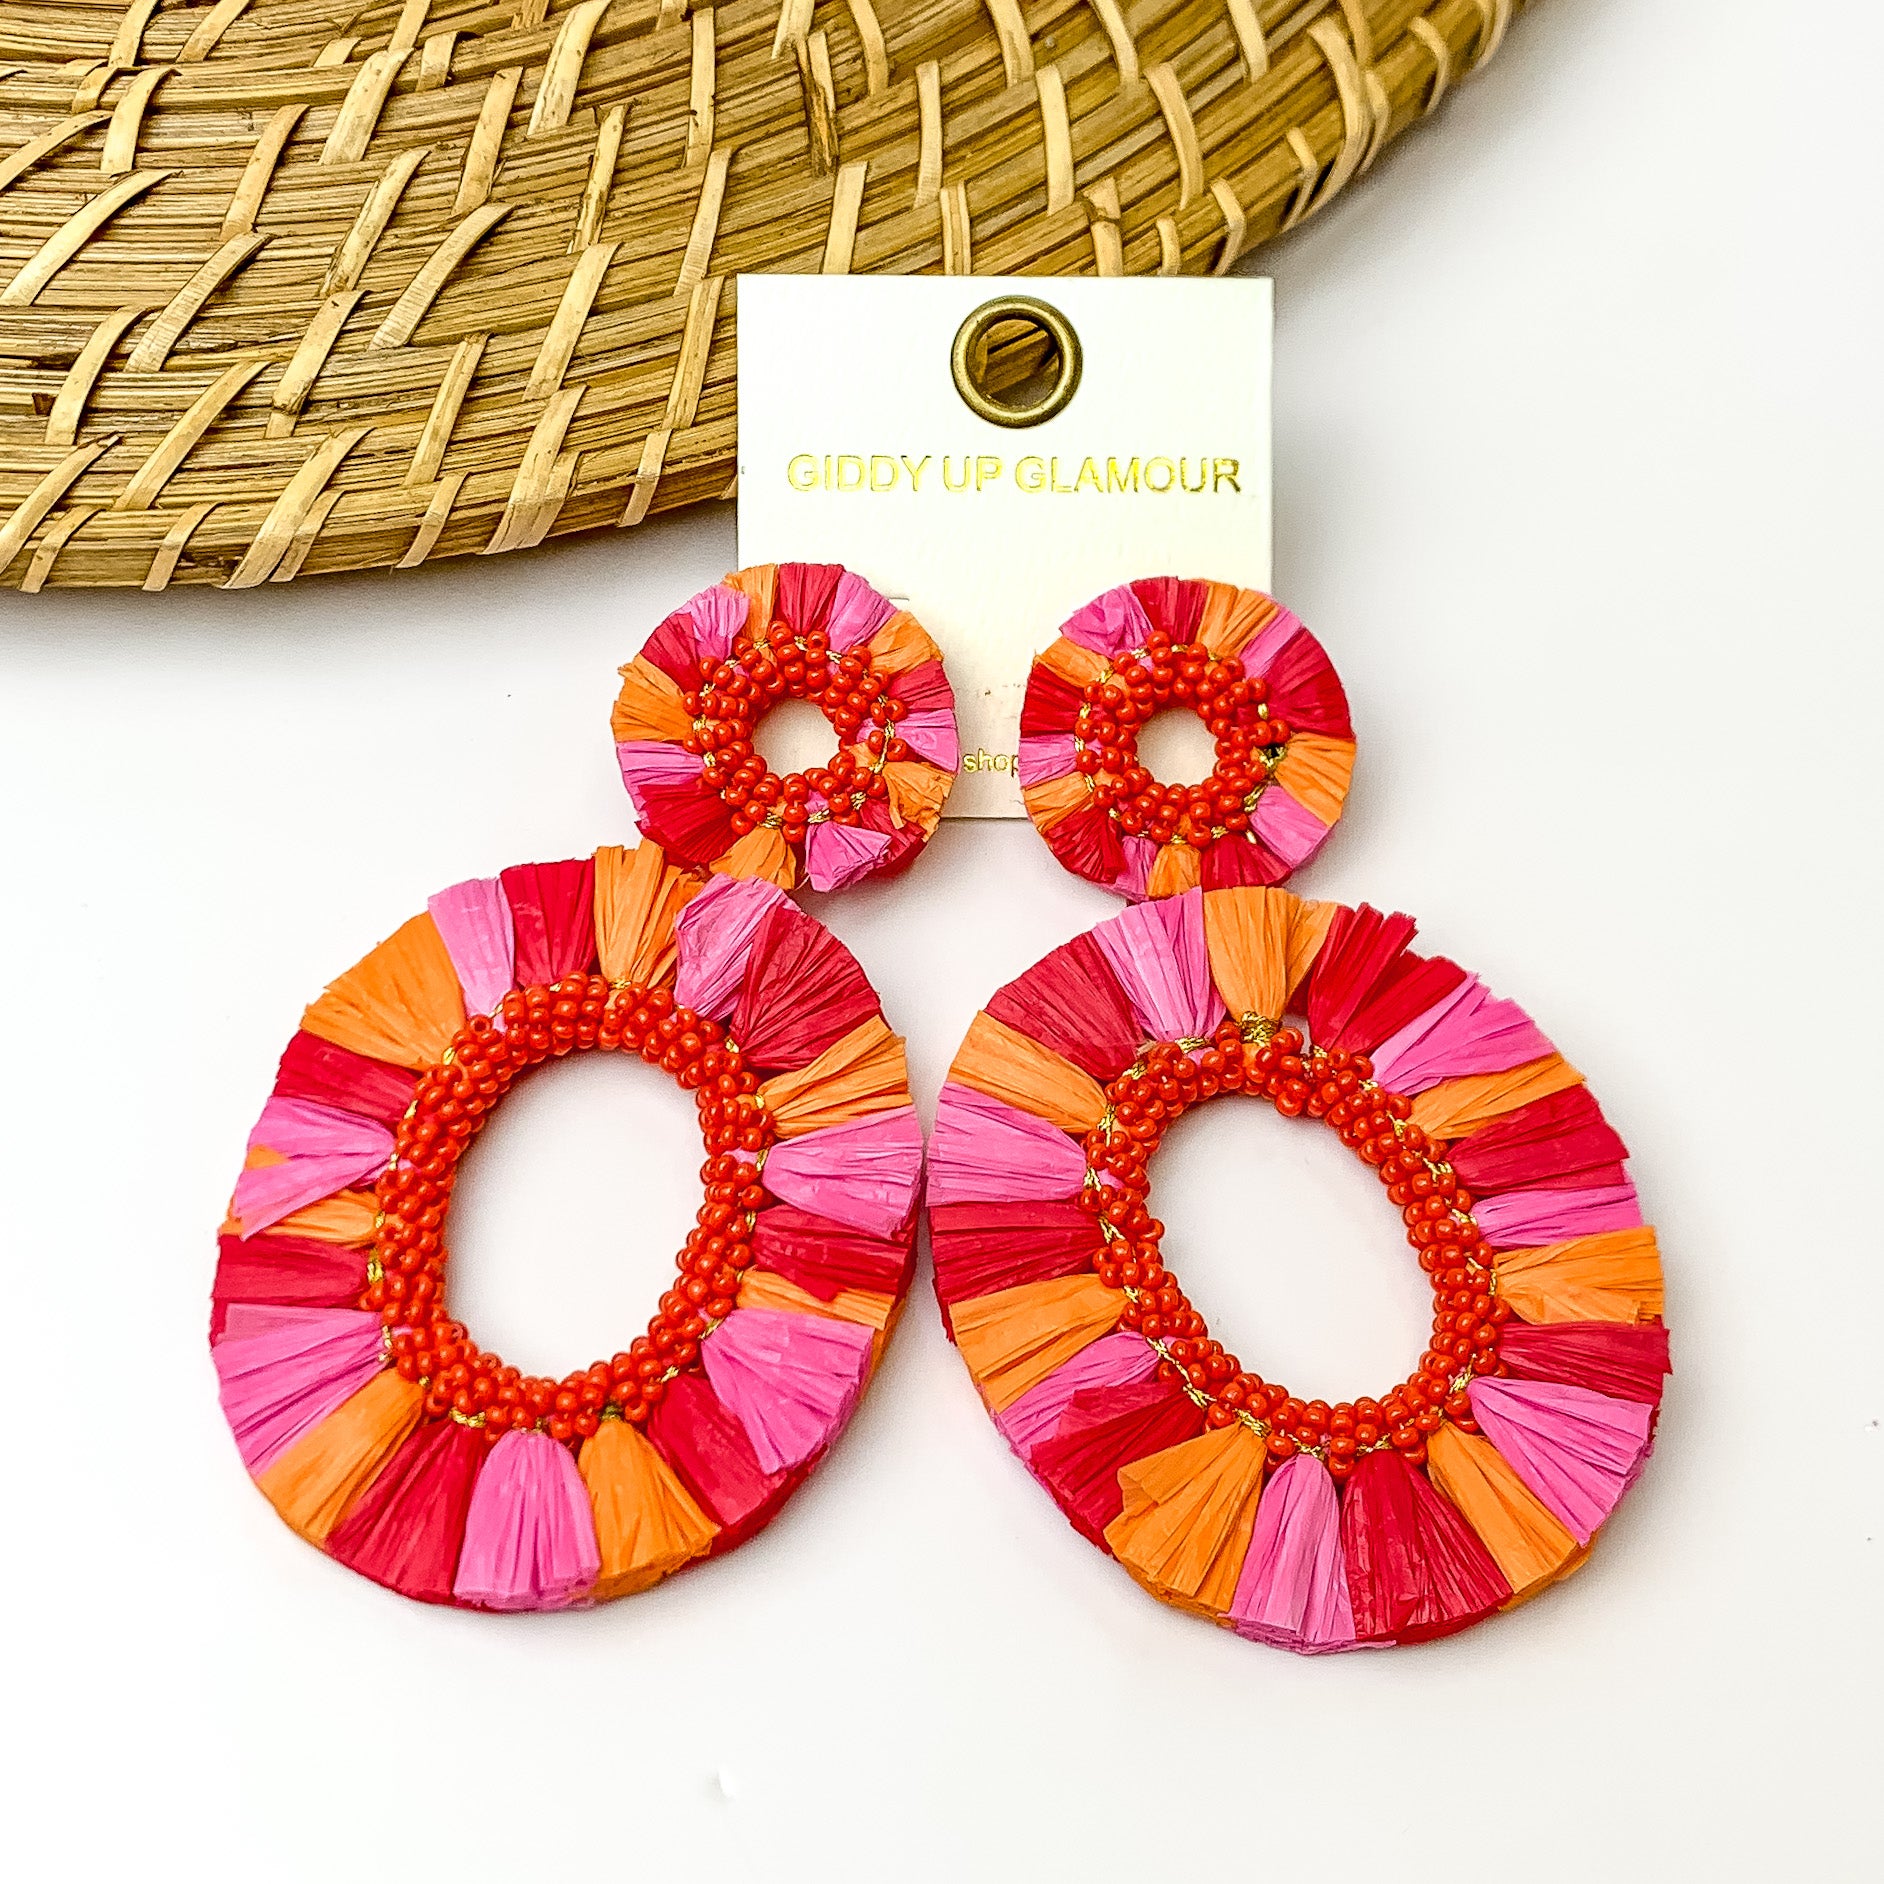 Red, pink, and orange fringe open hoops with orange beads on the inside. Pictured on a white background with a wood like decoration in the top left corner.